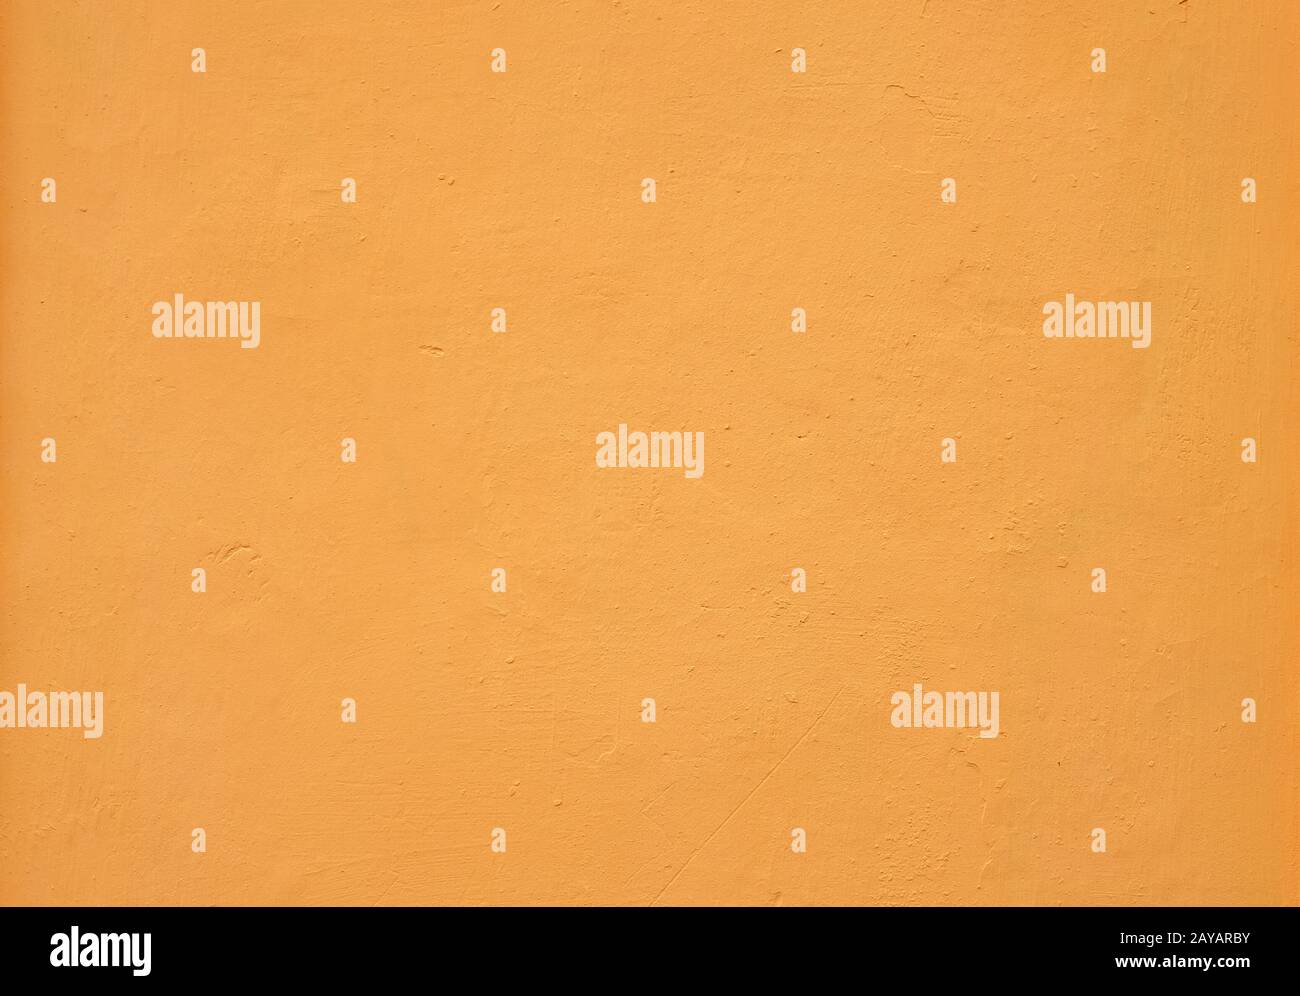 Pale orange surface, empty background or backdrop graphic element for text banners. Stock Photo